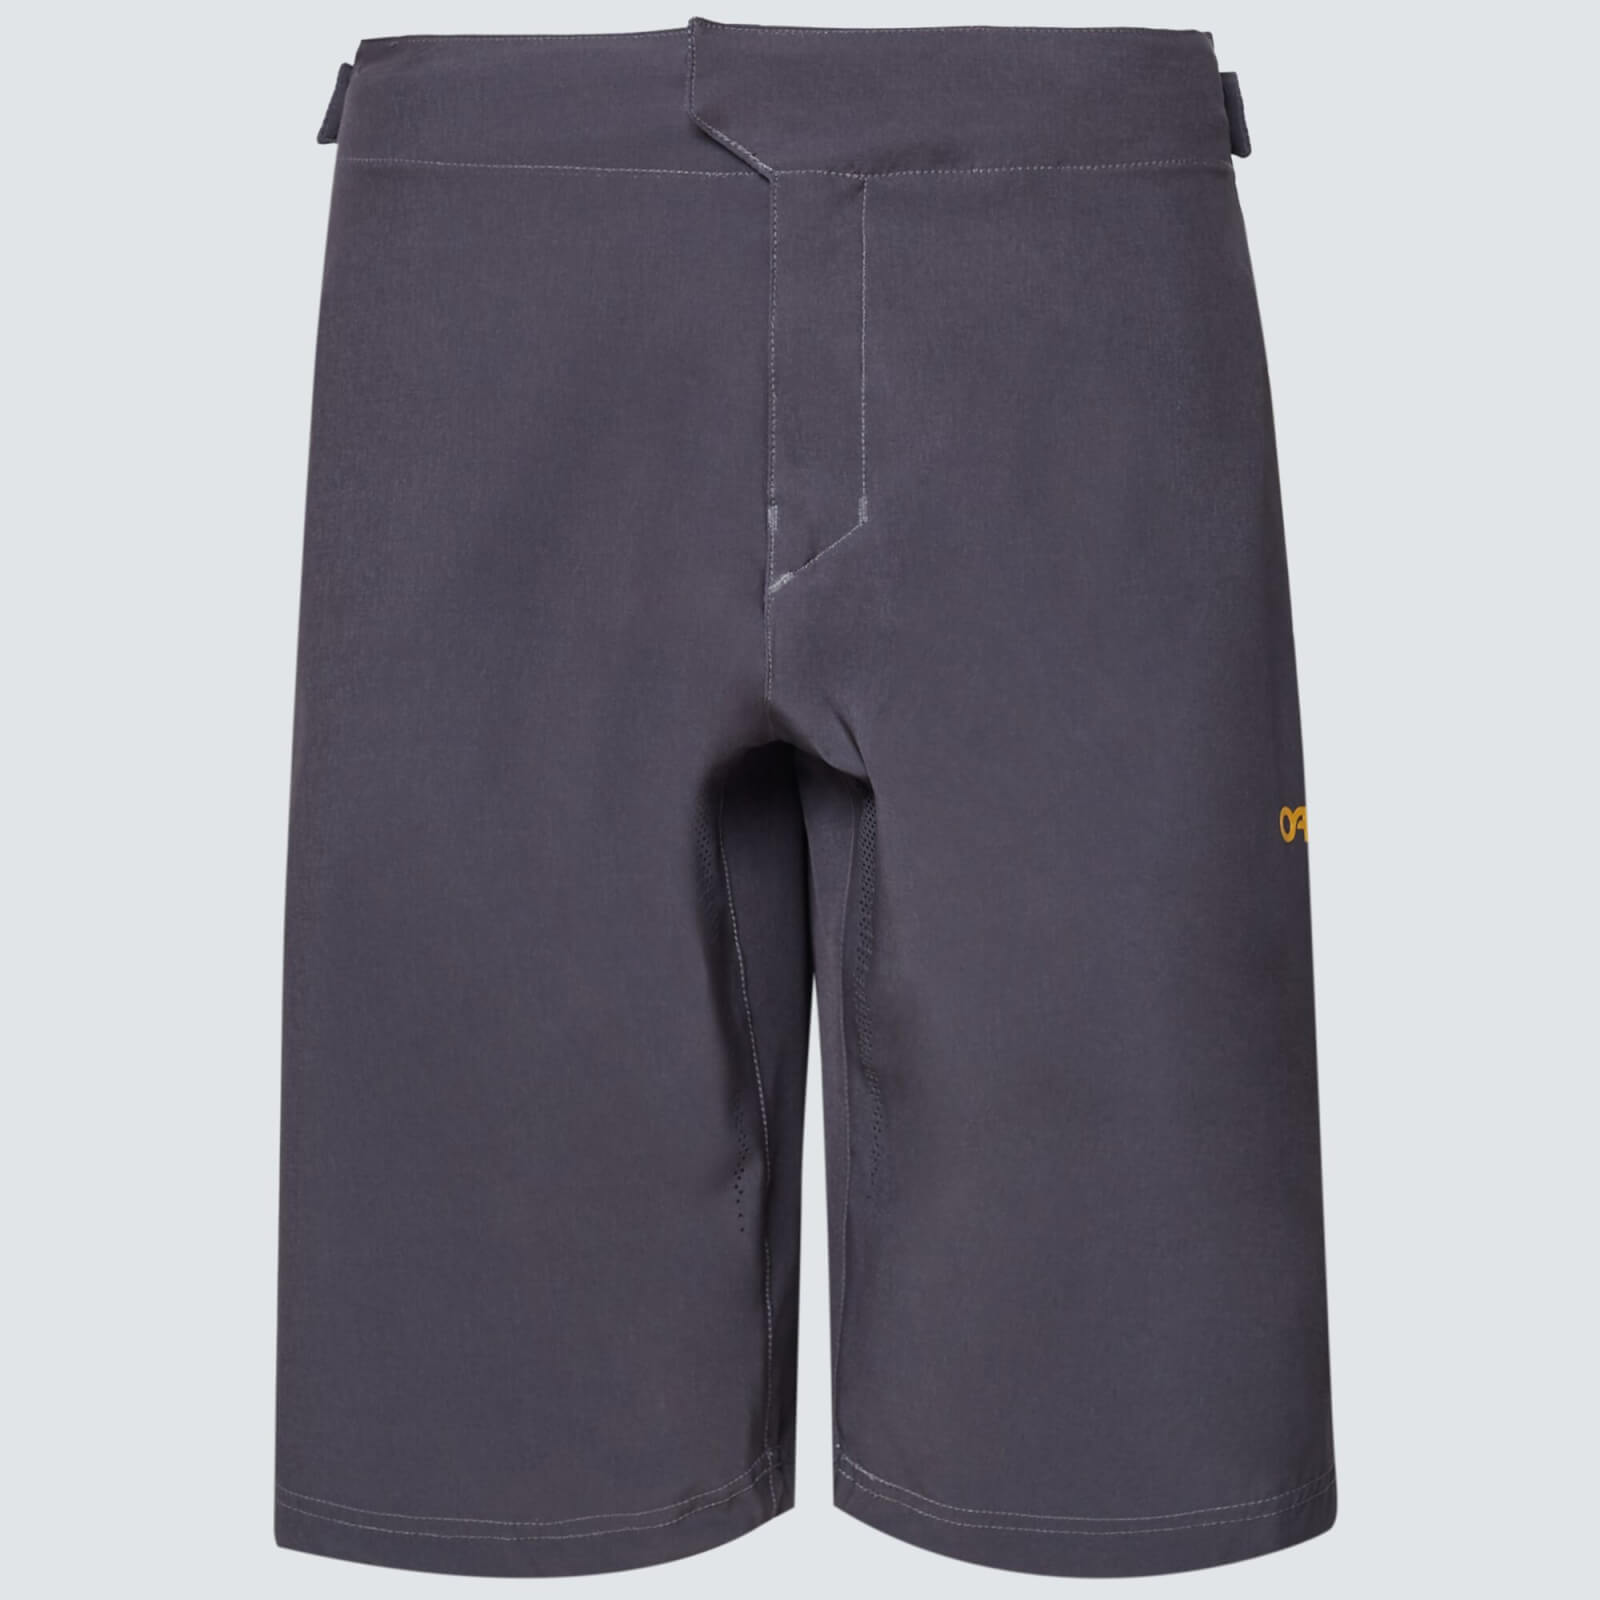 Oakley Reduct Berm Shorts - 32 - Forged Iron